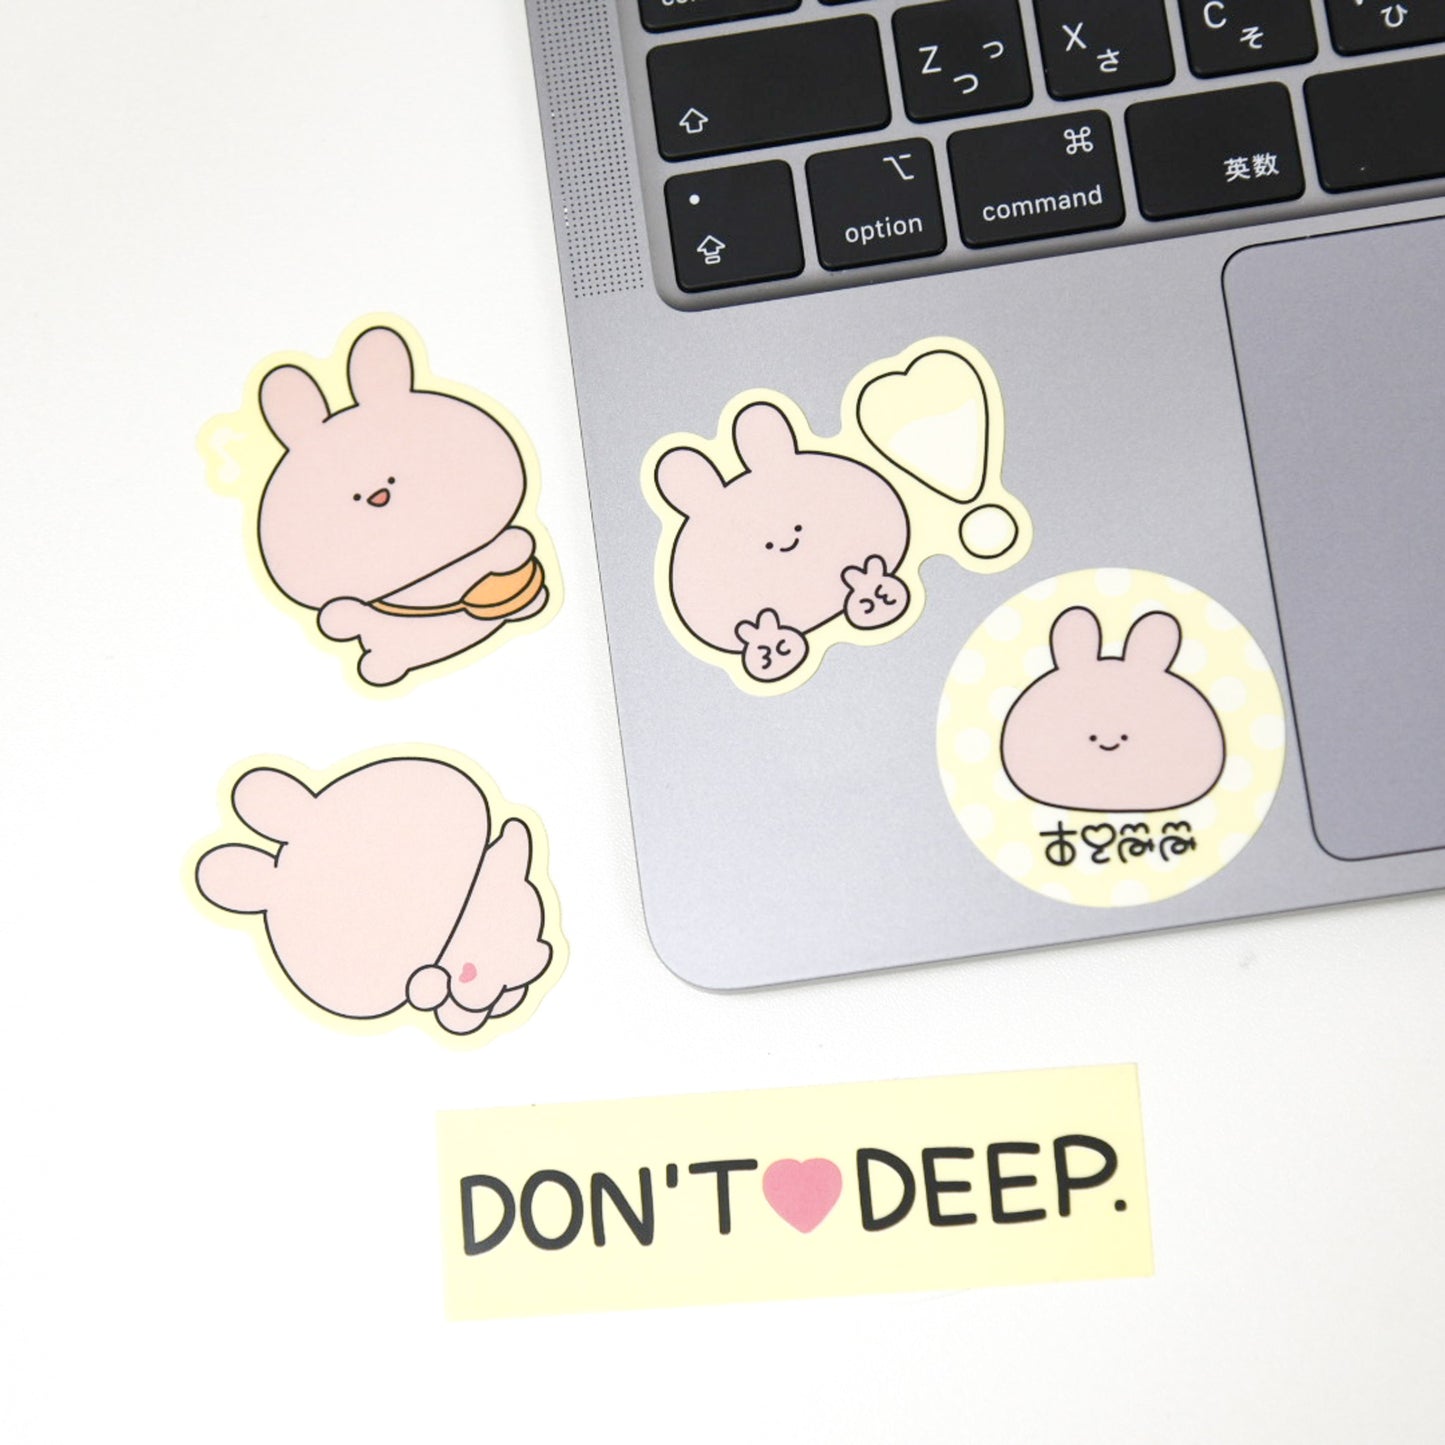 [Asamimi-chan] BASIC clear sticker (5 pieces)